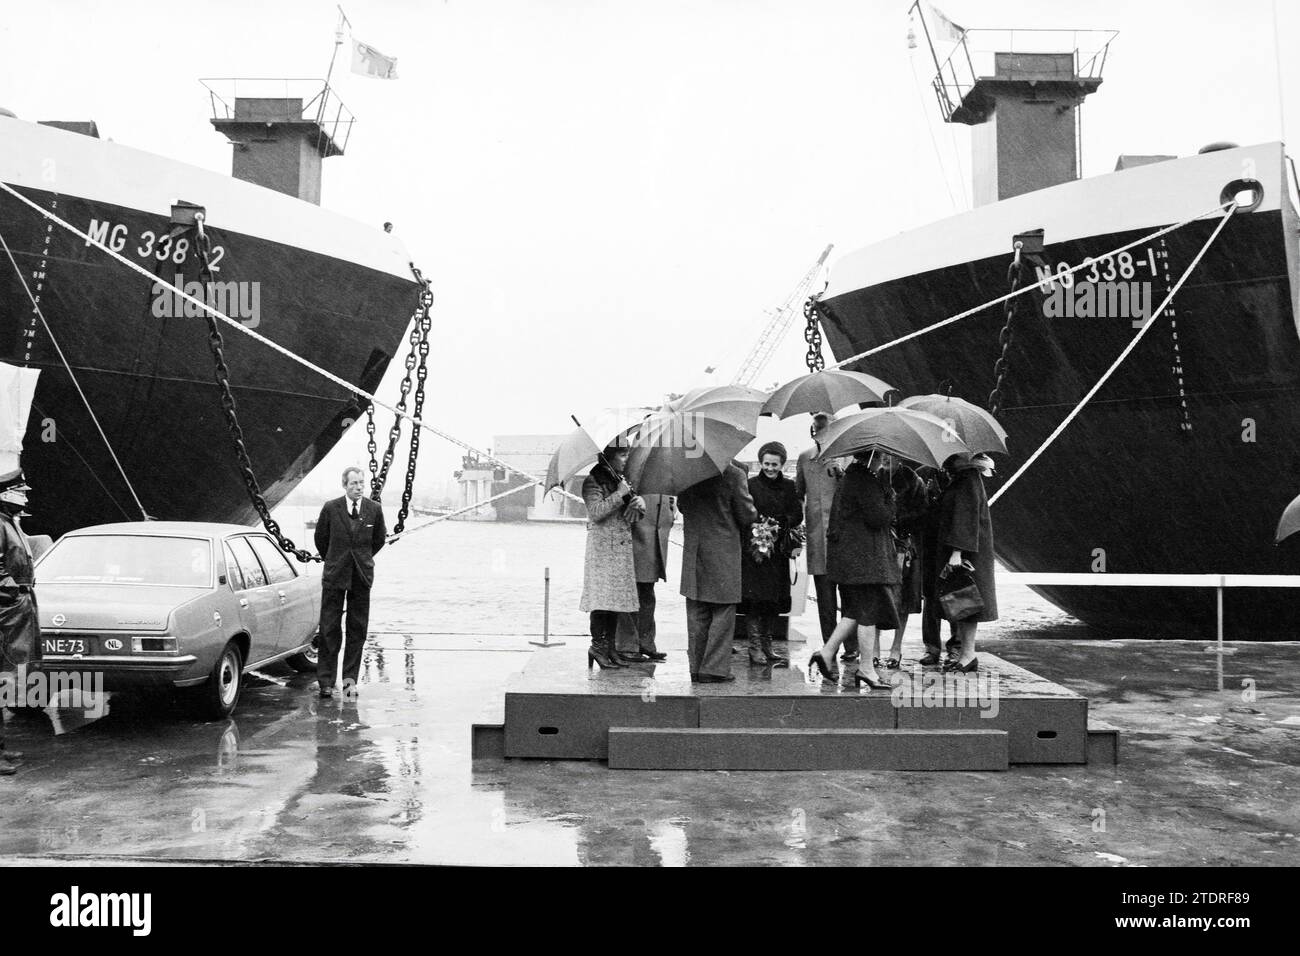 Doping two pontoons at N.D.S.M., Ships, 14-01-1977, Whizgle News from the Past, Tailored for the Future. Explore historical narratives, Dutch The Netherlands agency image with a modern perspective, bridging the gap between yesterday's events and tomorrow's insights. A timeless journey shaping the stories that shape our future Stock Photo